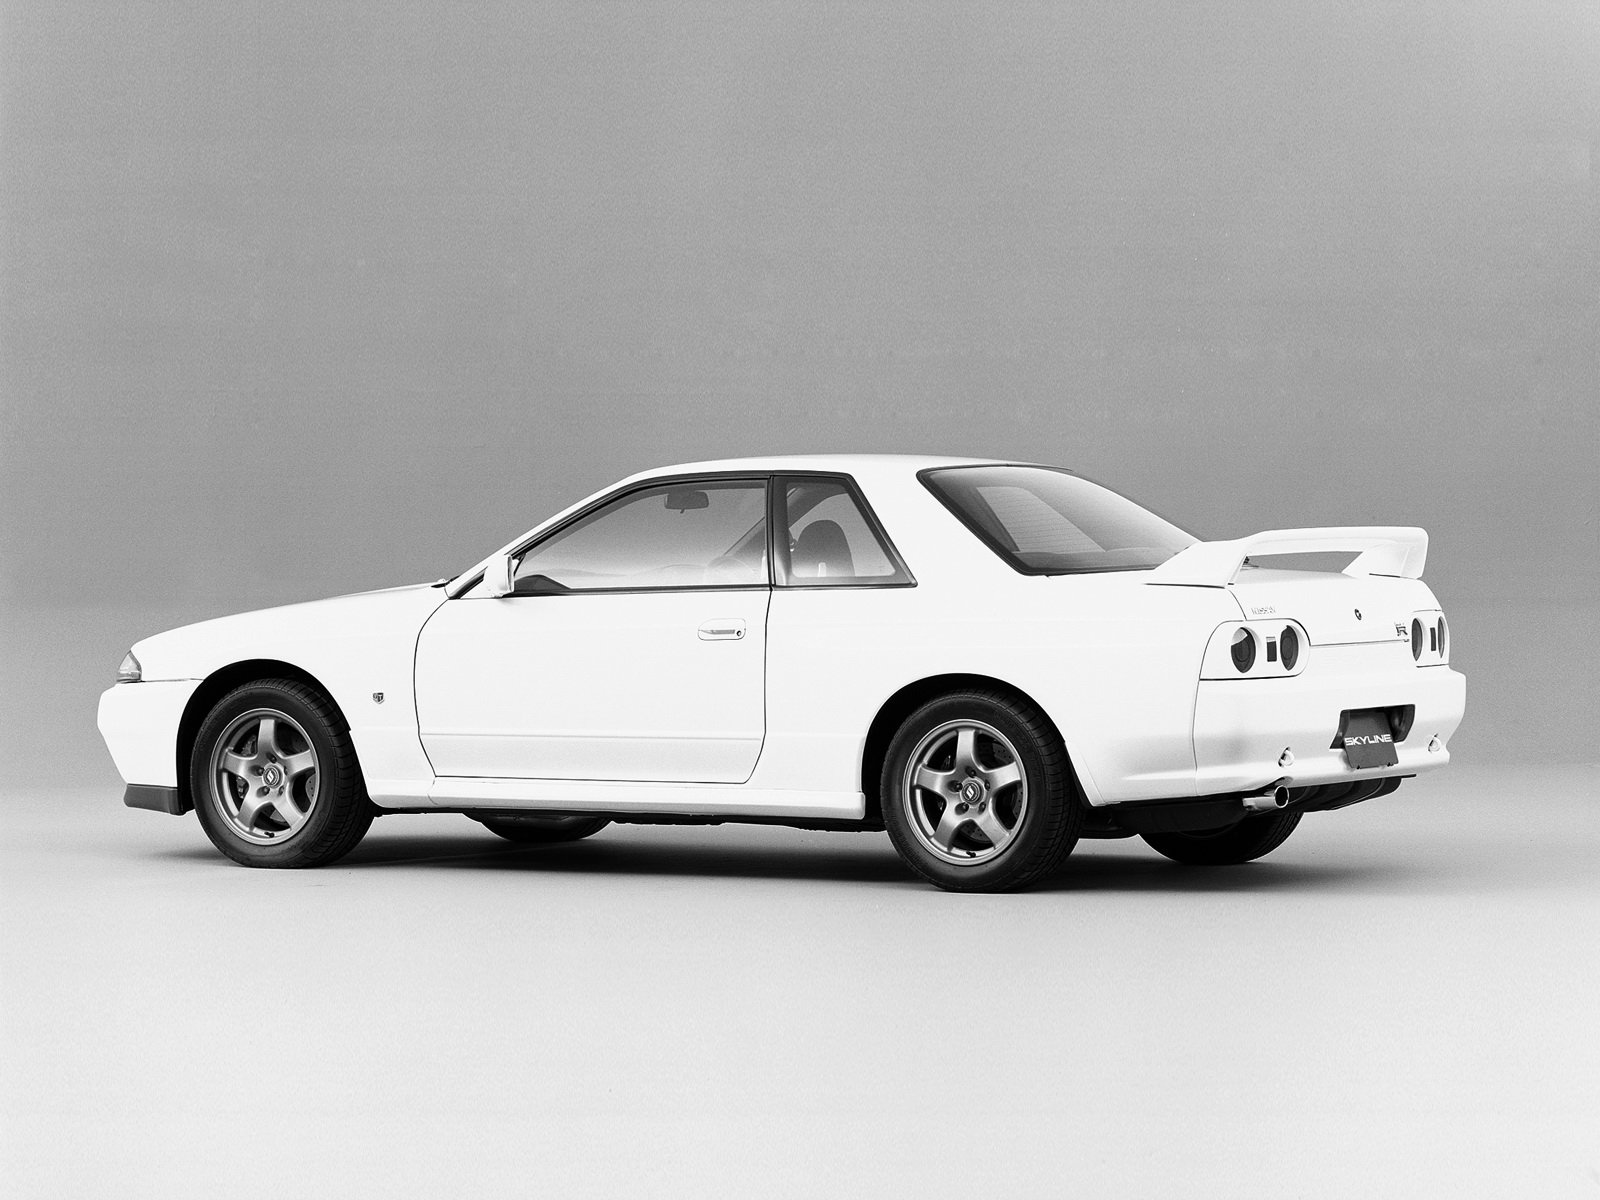 nissan, Skyline, Gt r, 1989, Coupe, Cars Wallpaper